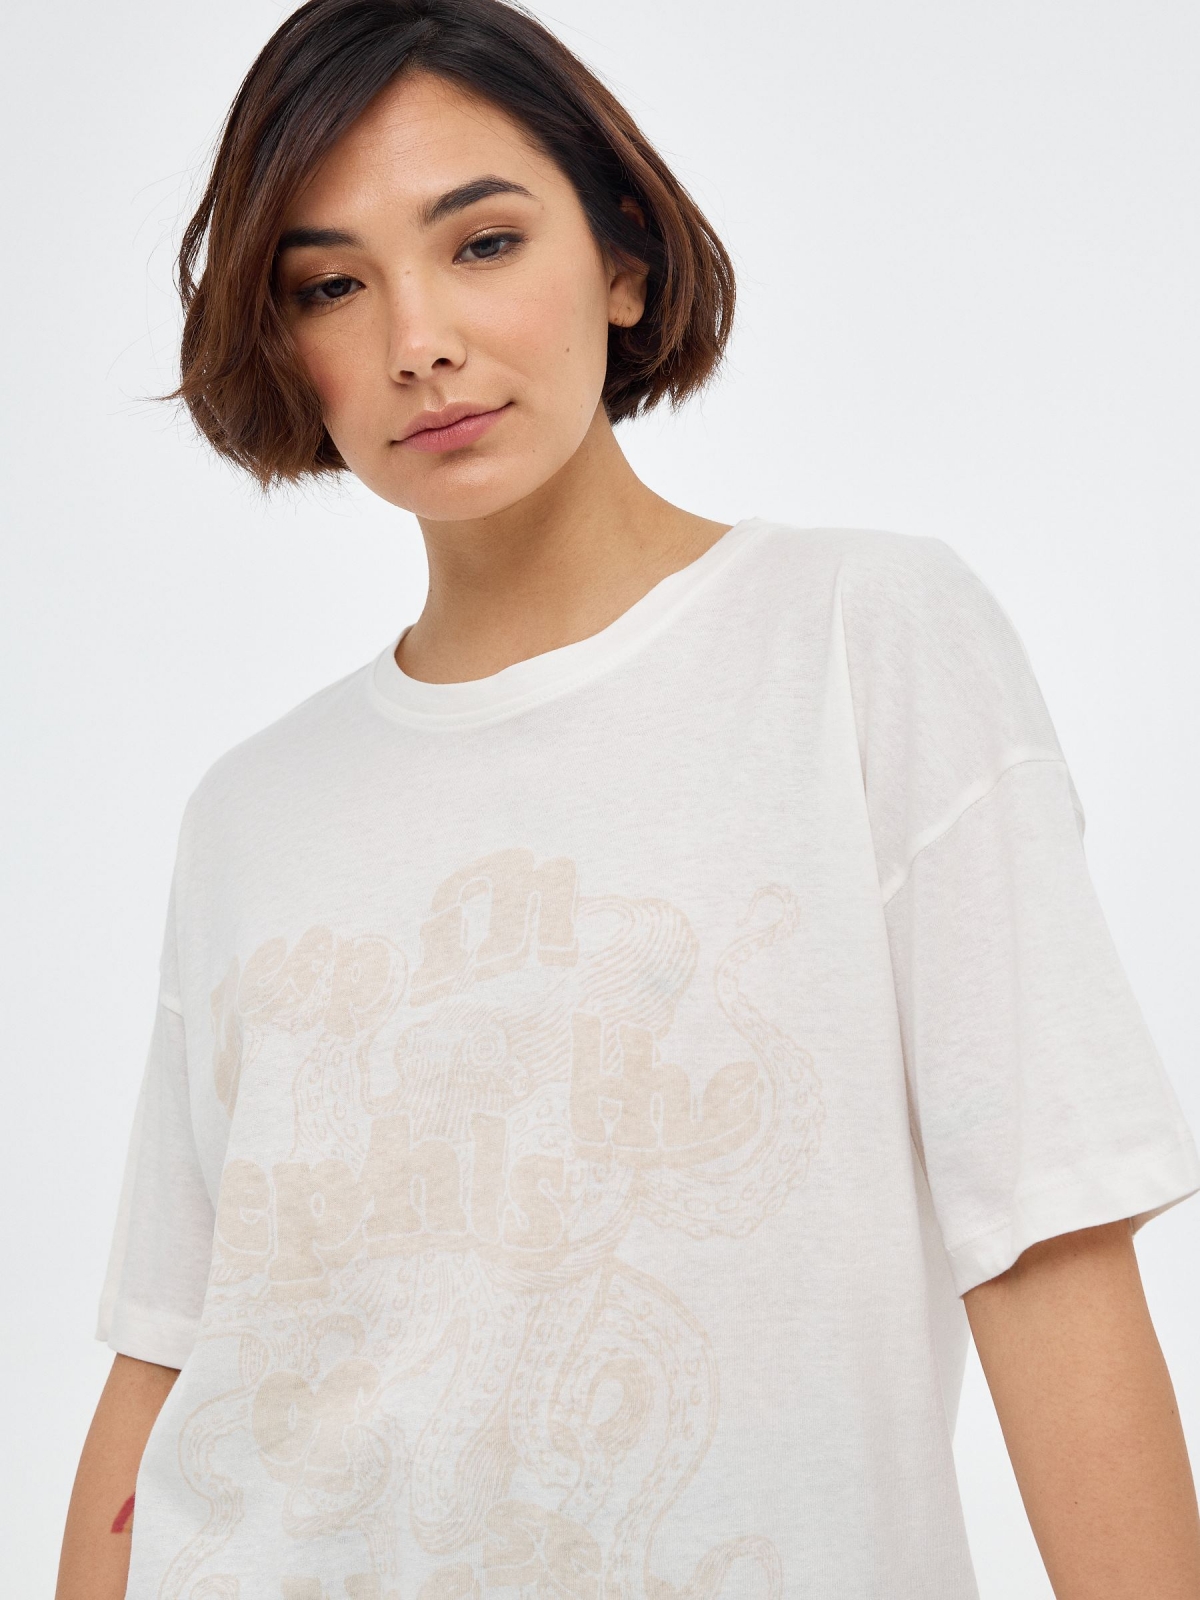 Oversized printed t-shirt off white detail view